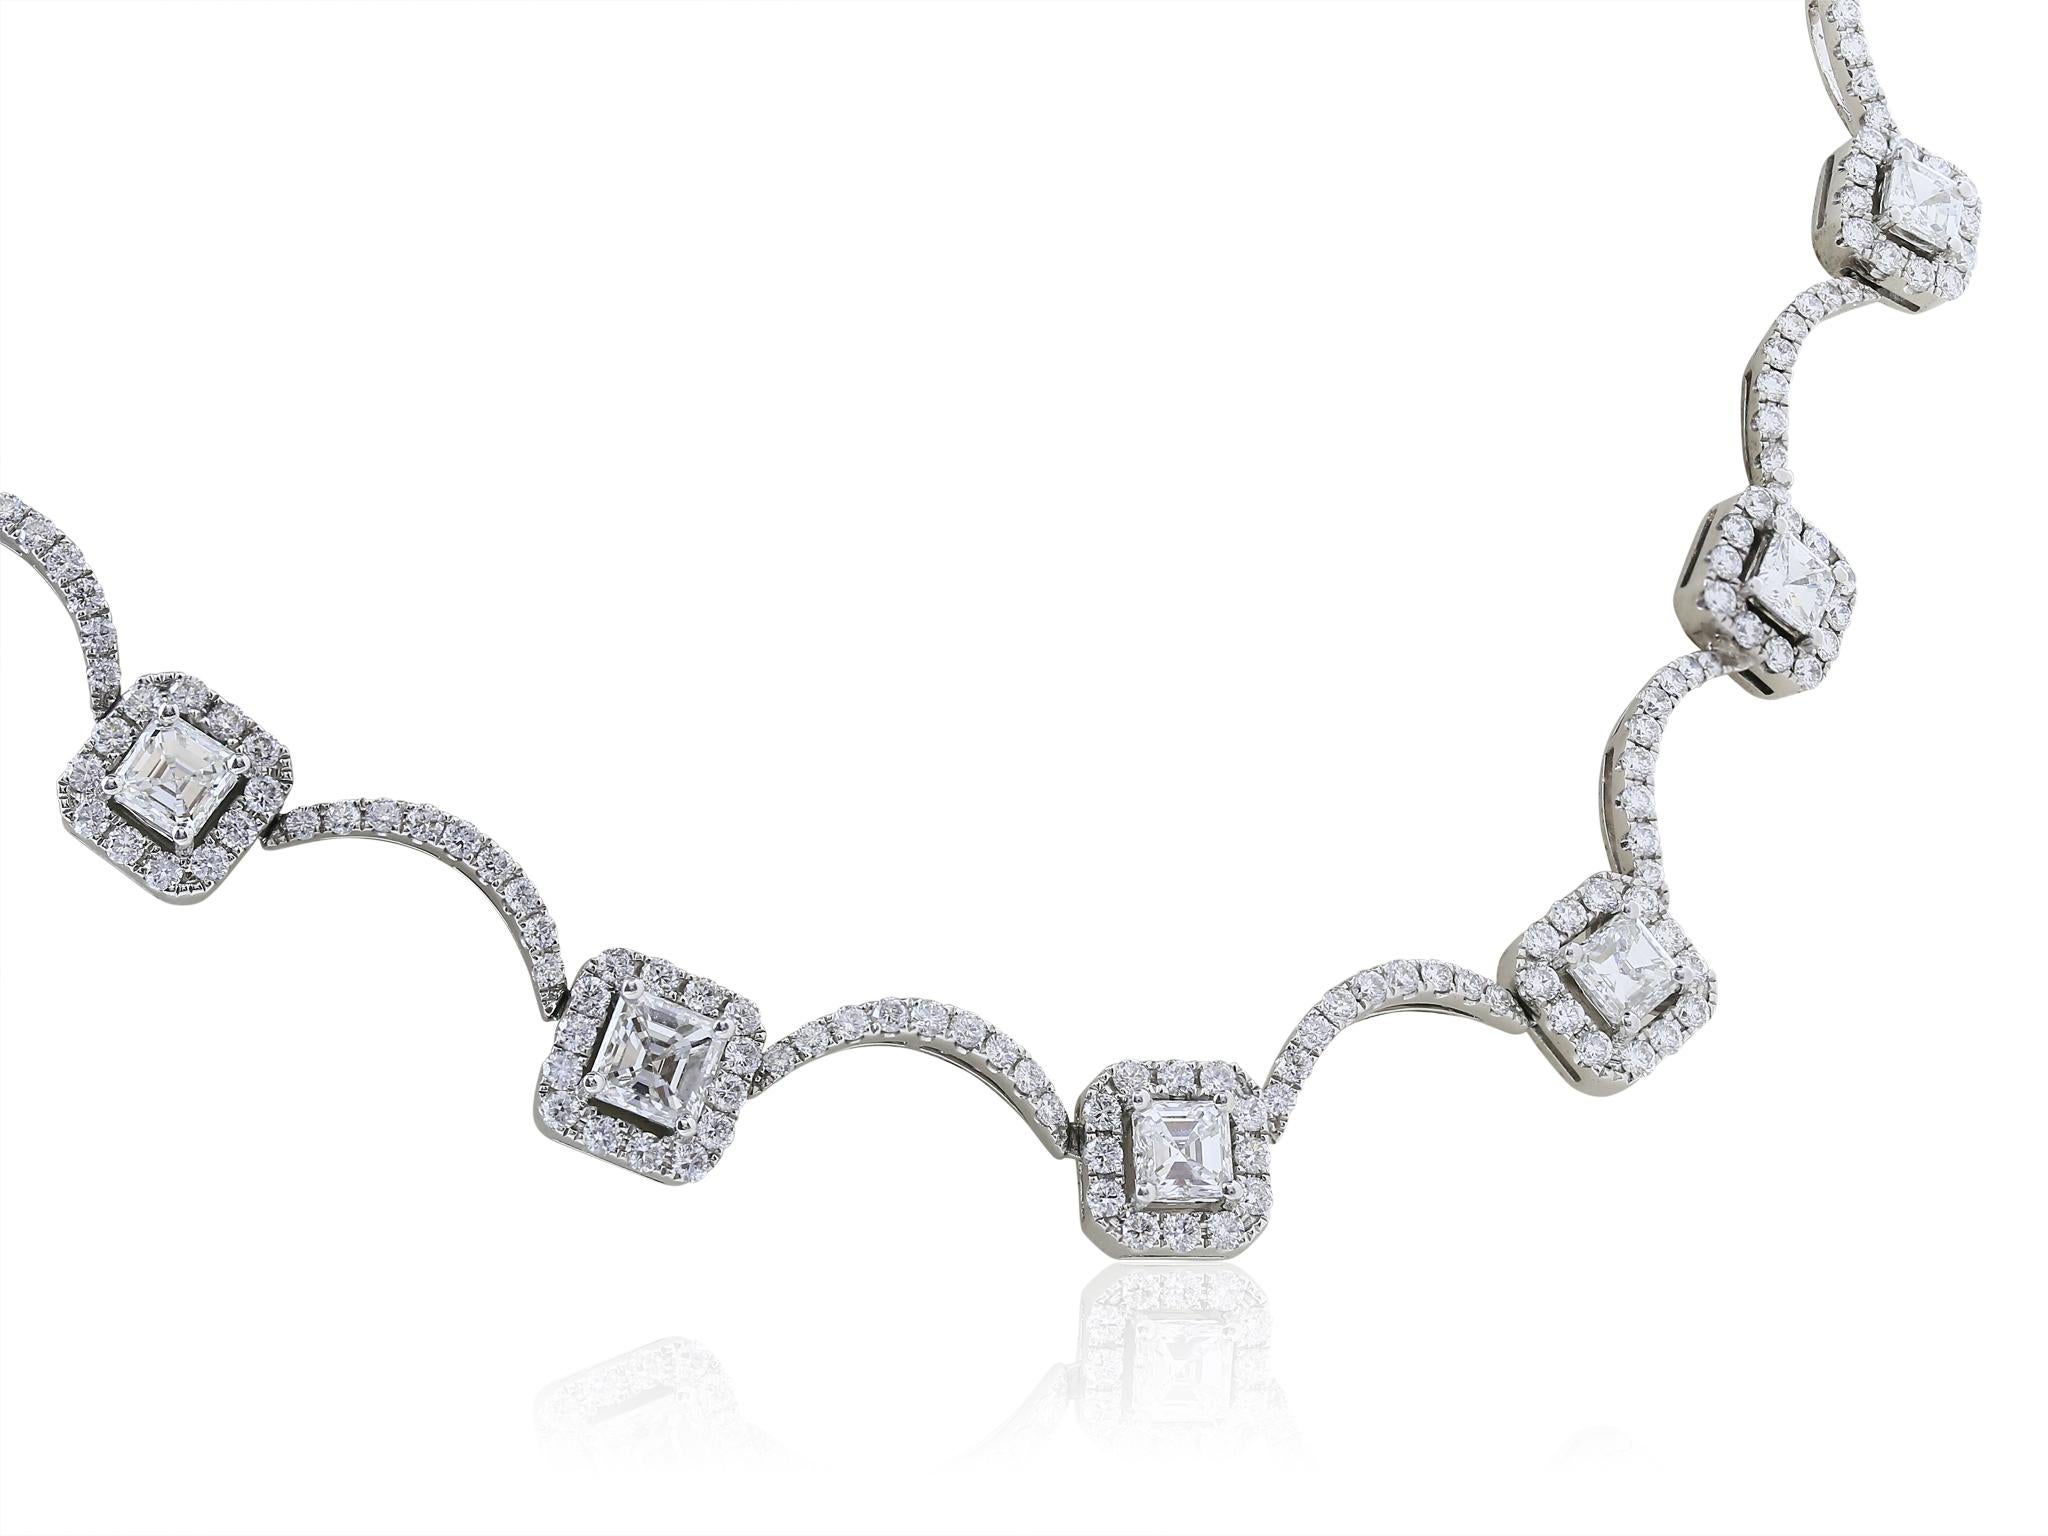 18 karat white gold diamond necklace featuring 20 Asscher cut diamonds with a total approximate weight of 5.94 carats, each diamond is framed with a halo of round brilliant cut diamonds, with a total weight of approximately 6.05 carats that follows